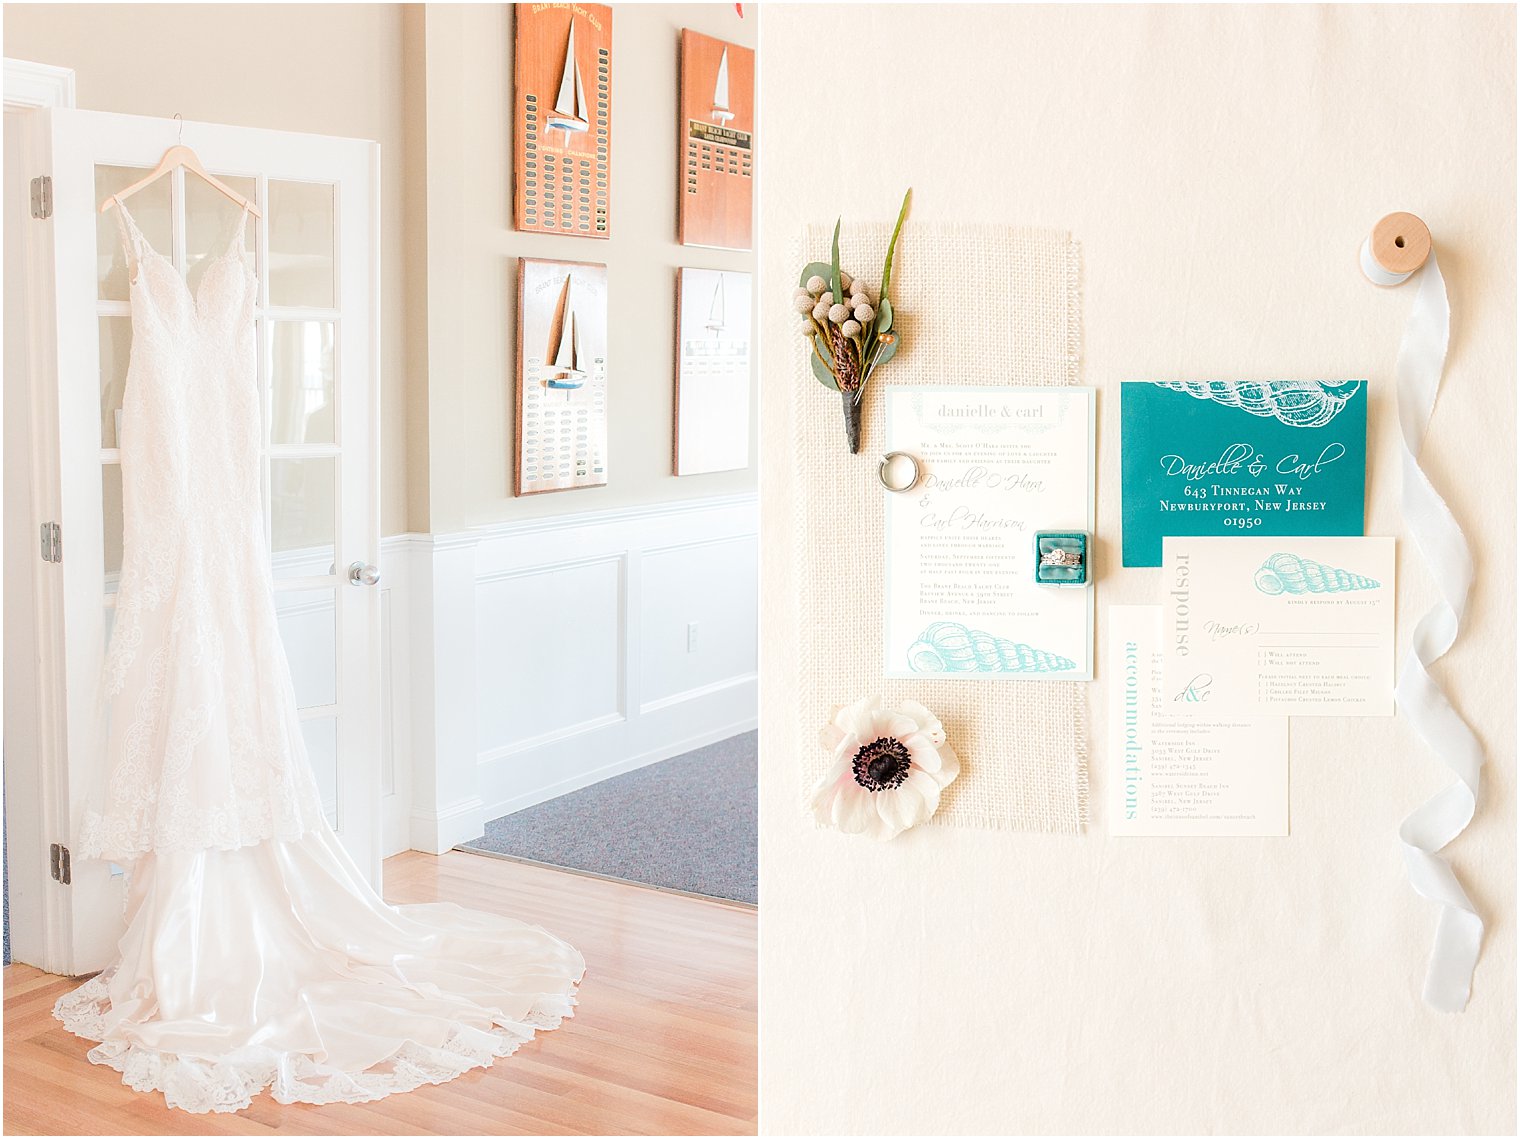 Wedding dress provided by Sales Unlimited | Invites by Beacon Lane